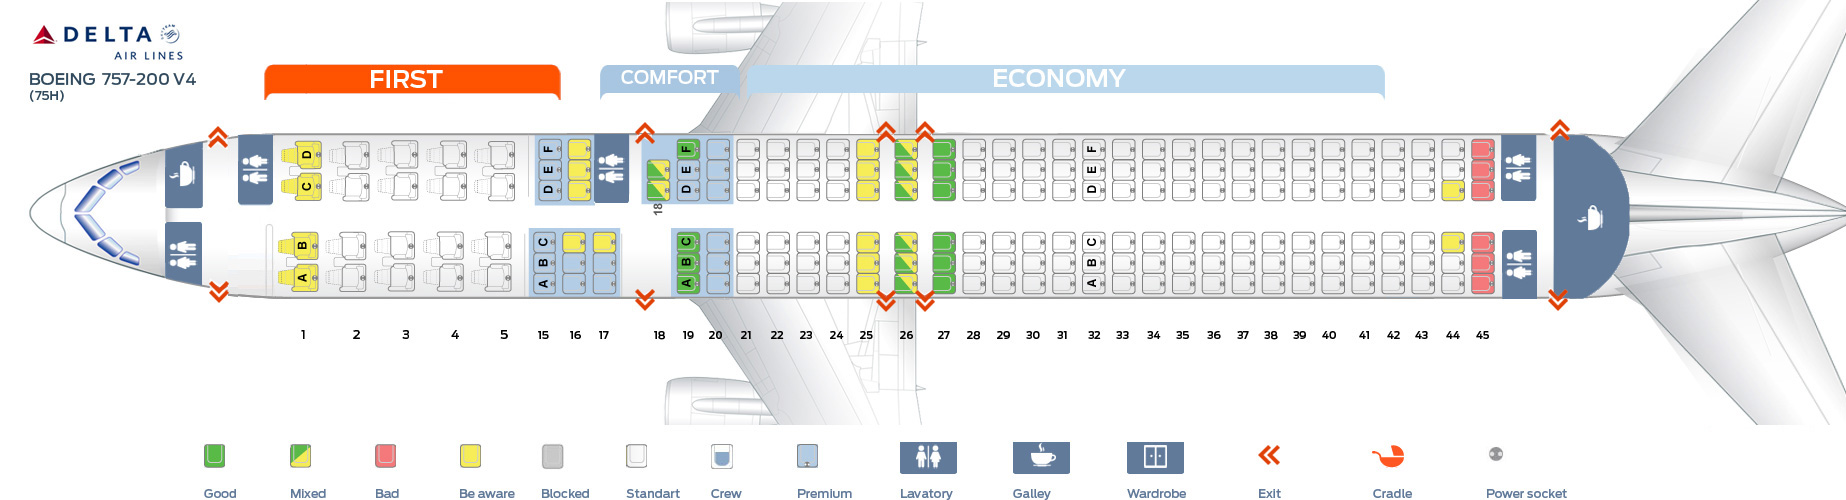 Seat map Boeing 757200 Delta Airlines. Best seats in plane